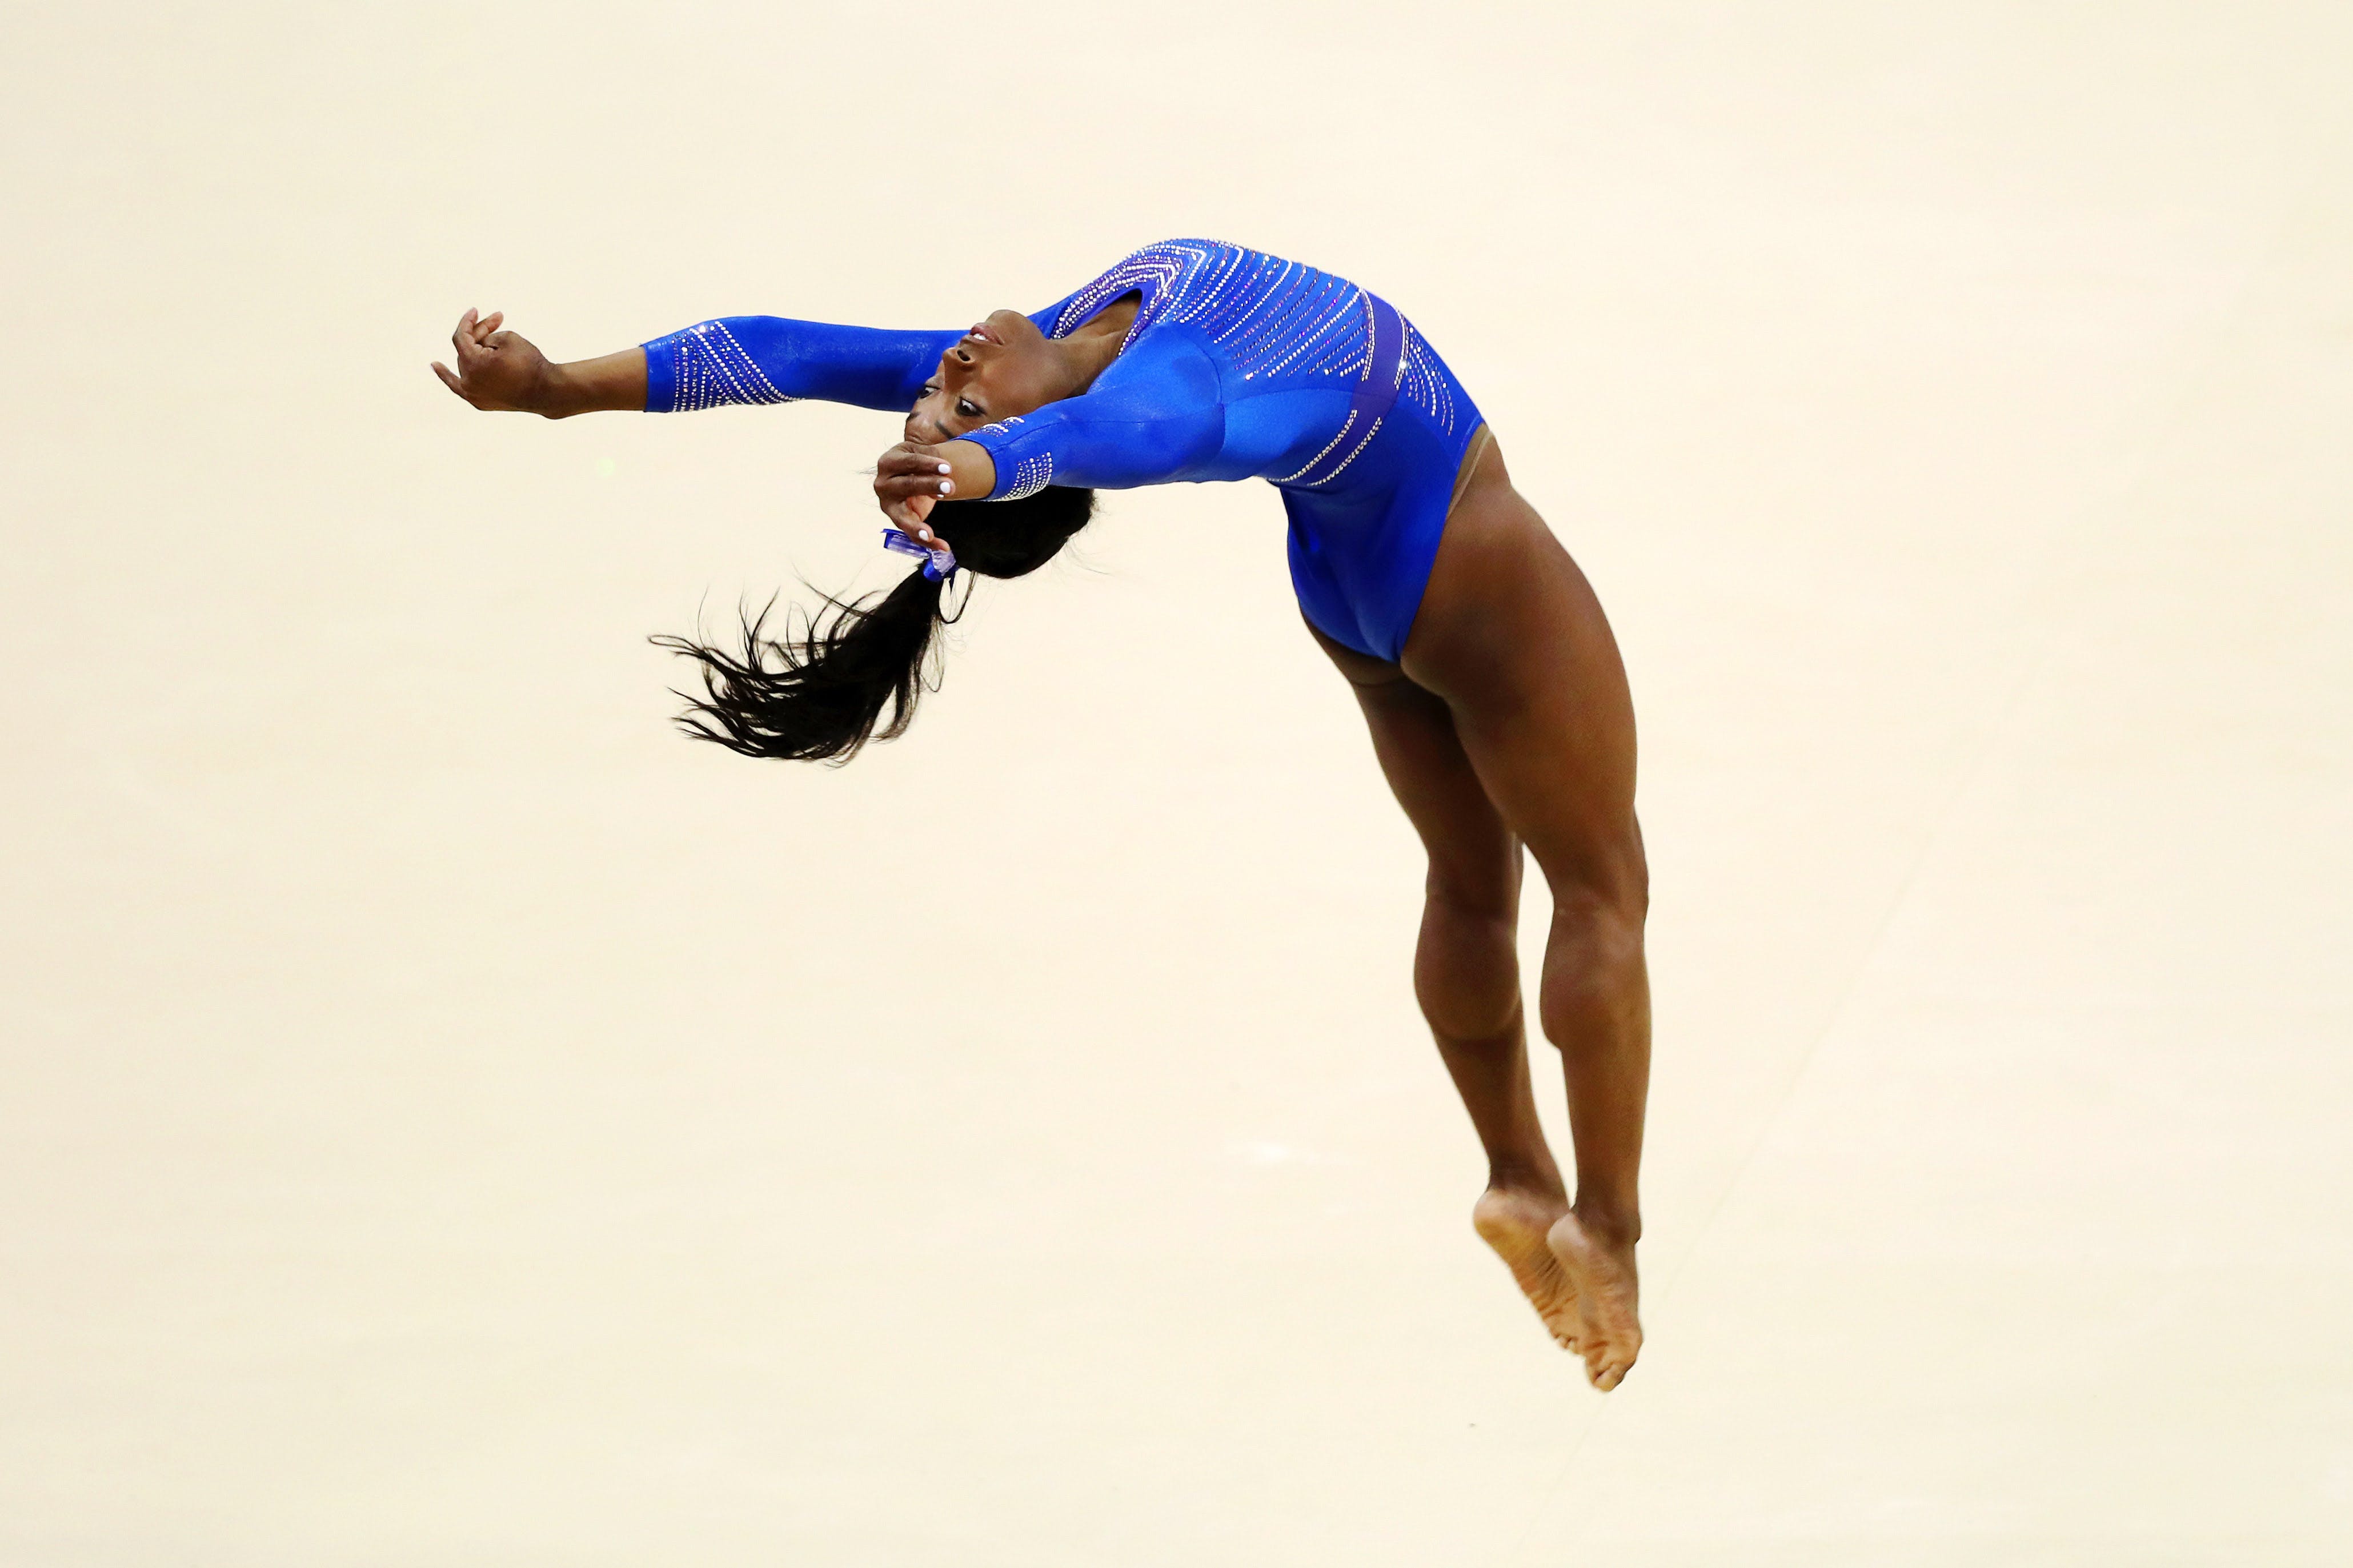 The Best Thing in Texas: Once Again, Simone Biles Shows Why She's the Greatest of All Time